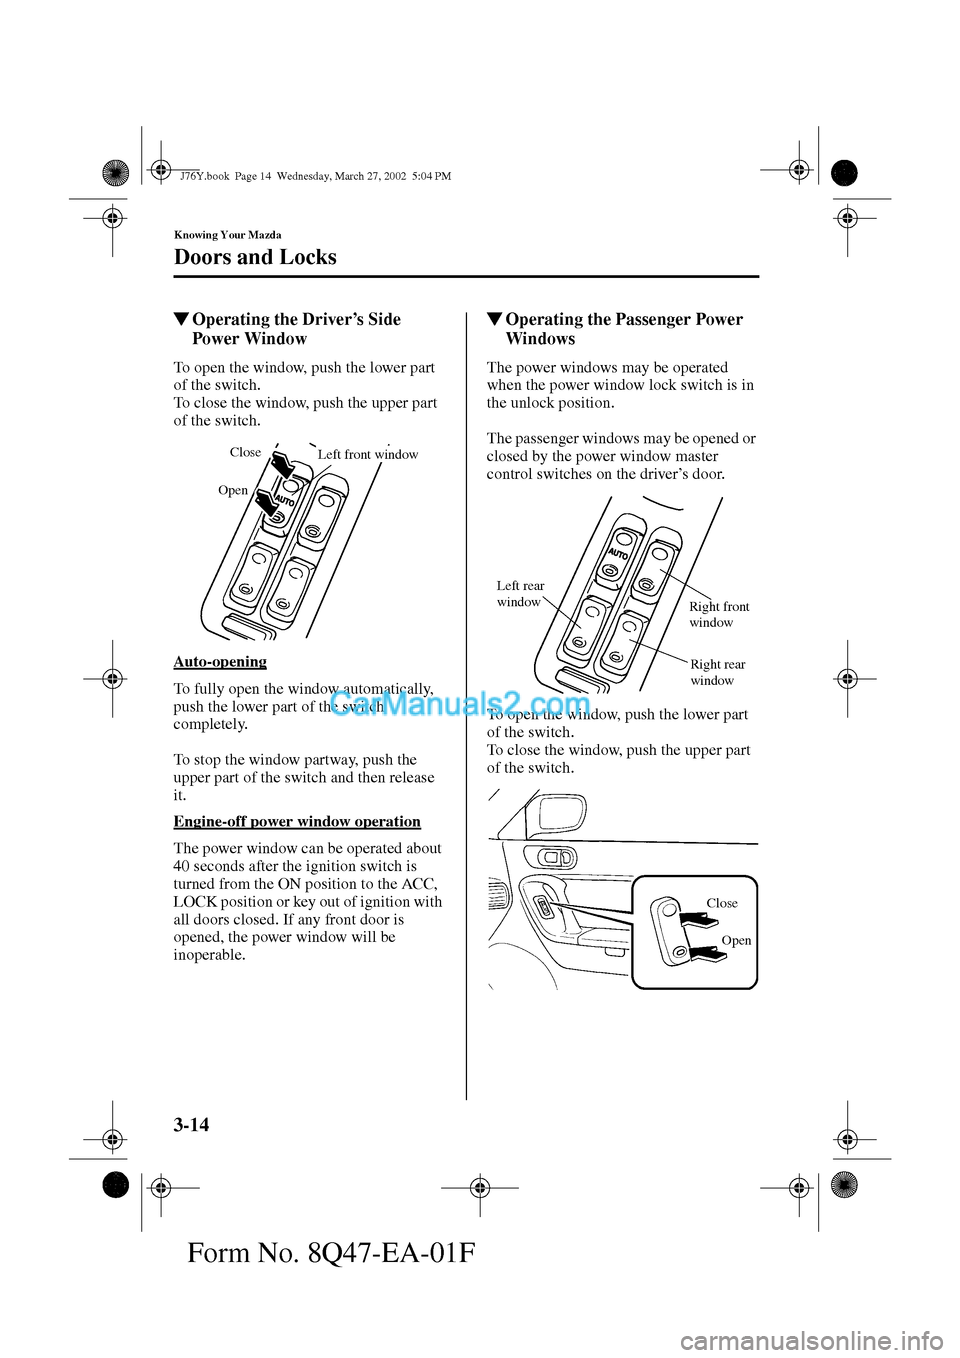 MAZDA MODEL MILLENIA 2002  Owners Manual (in English) 3-14
Knowing Your Mazda
Doors and Locks
Form No. 8Q47-EA-01F
Operating the Driver’s Side 
Power Window
To open the window, push the lower part 
of the switch.
To close the window, push the upper pa